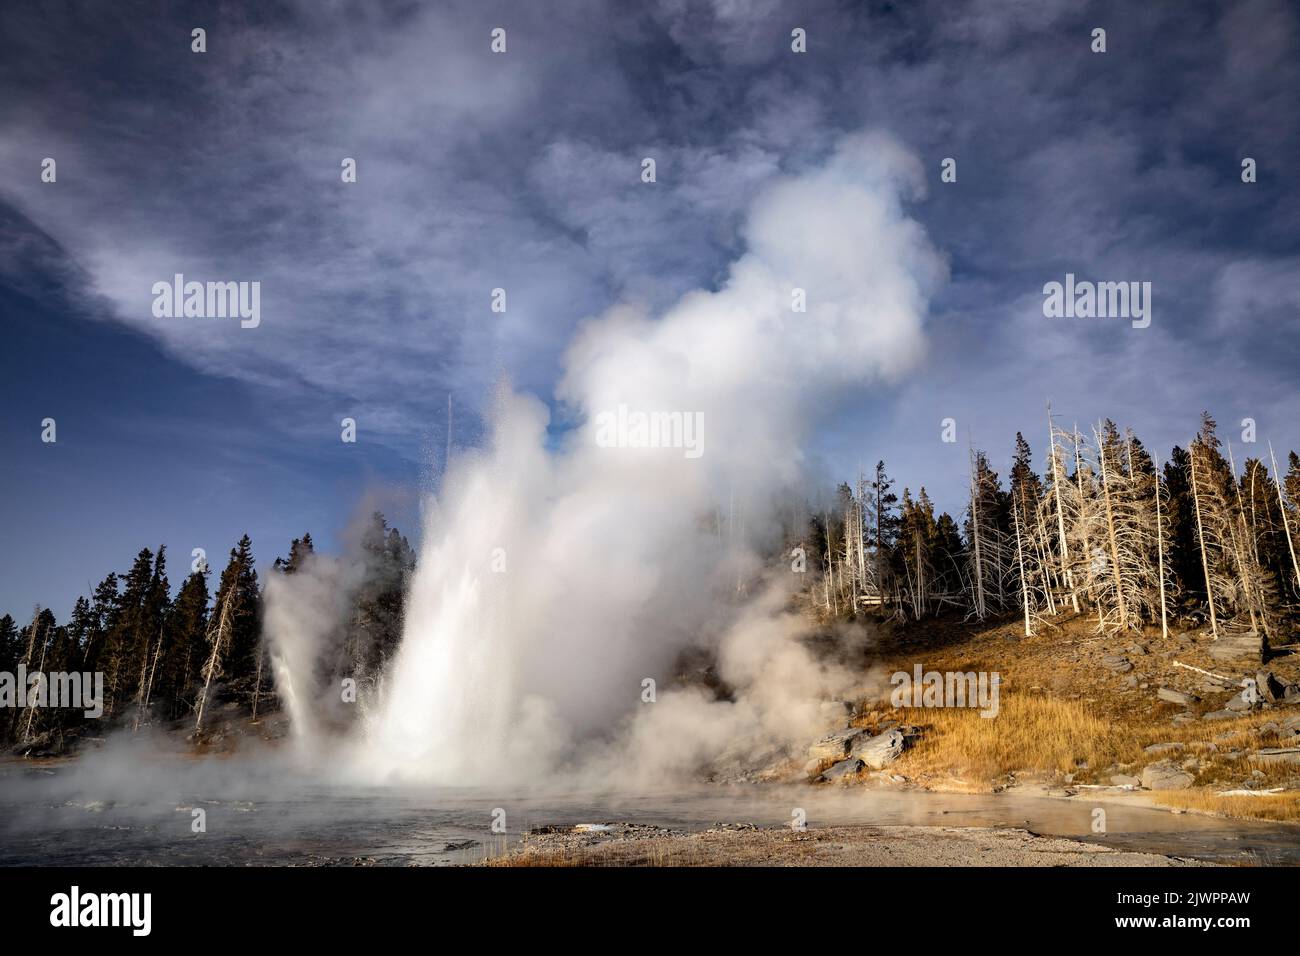 WY05041-00....WYOMING - Grand Geyser in the Upper Geyser Basin of the Old Faithful area, Yellowstone National Park. Stock Photo